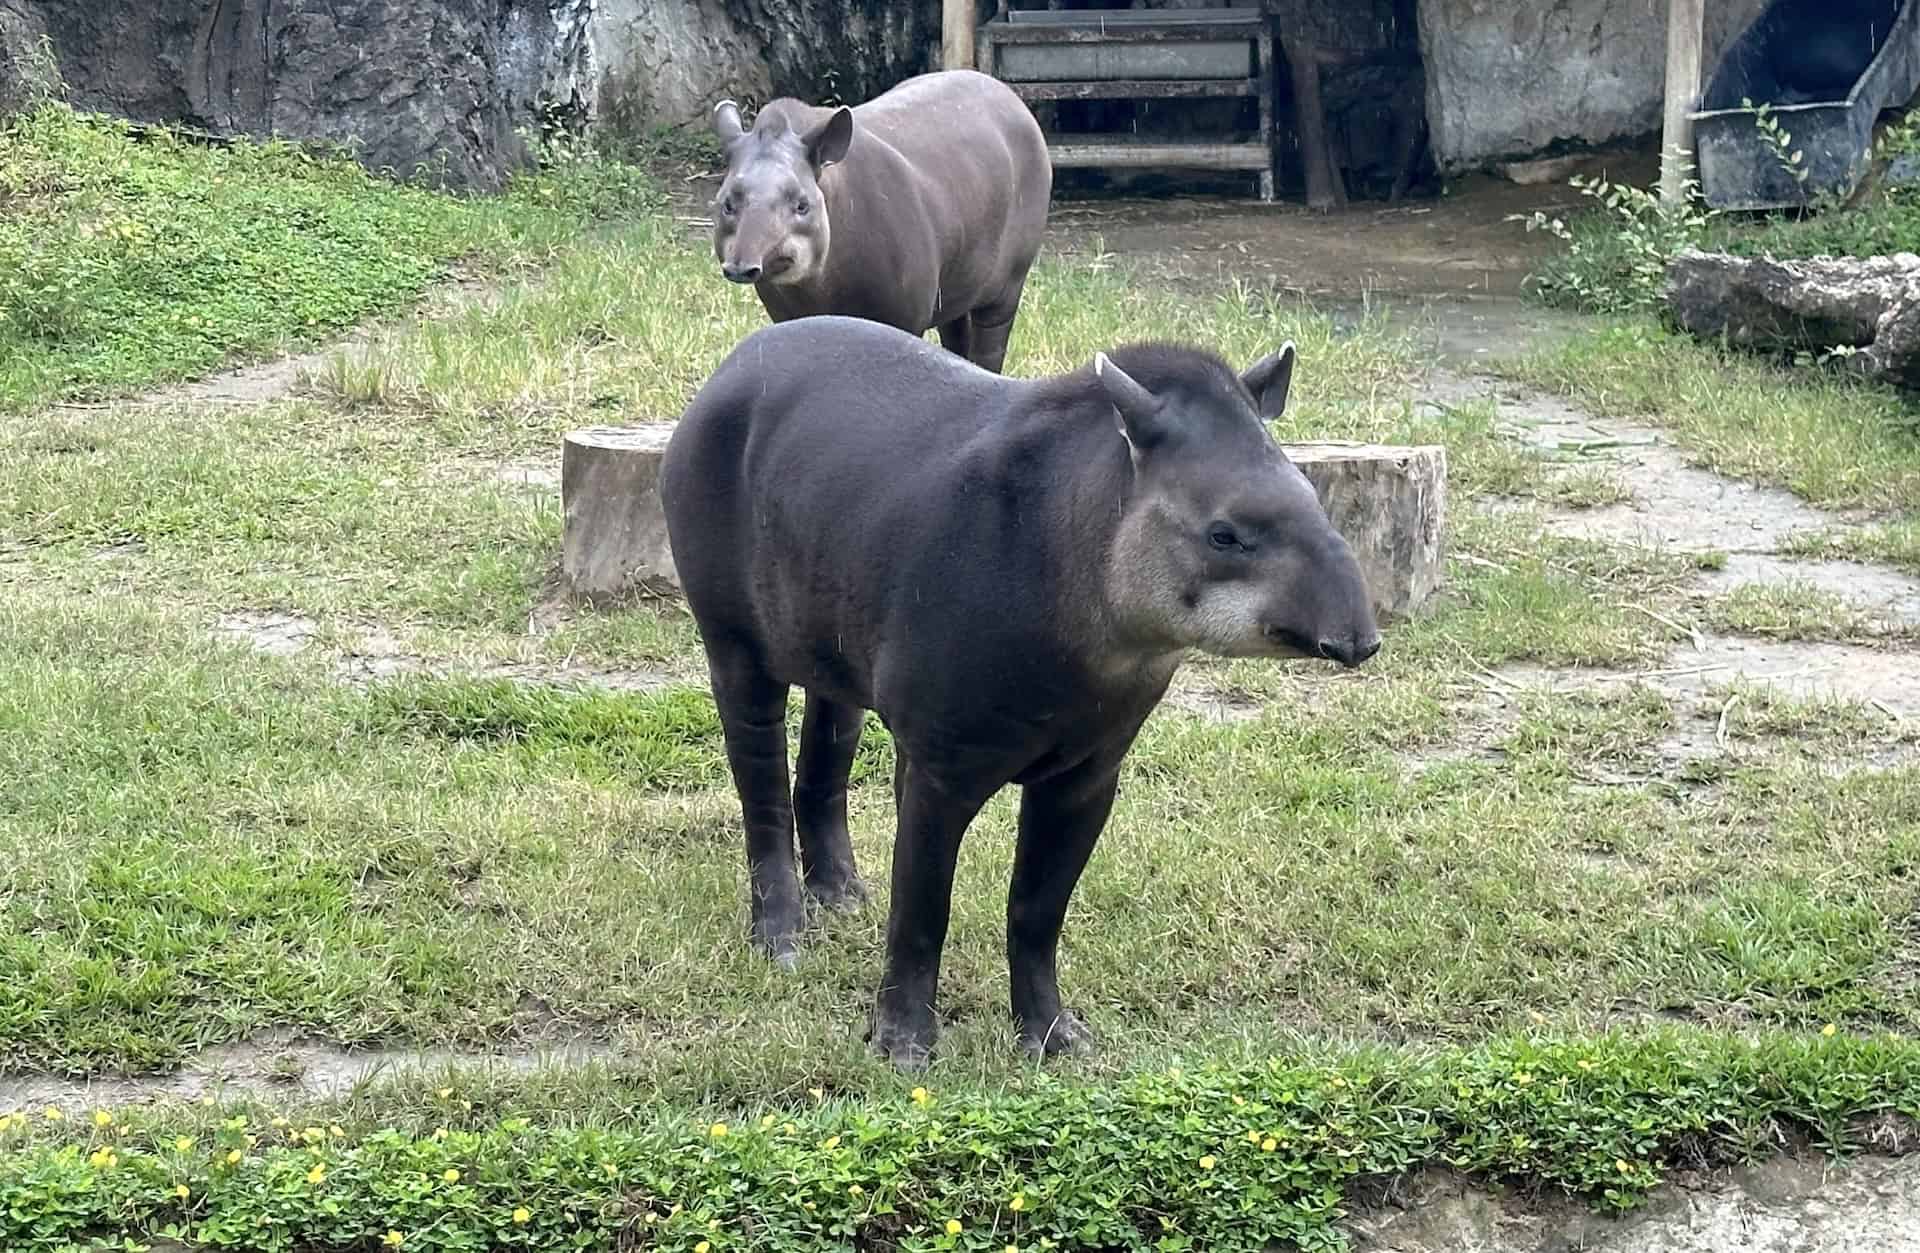 Tapirs in the Andean Forest at Bioparque Ukumarí in Risaralda, Colombia